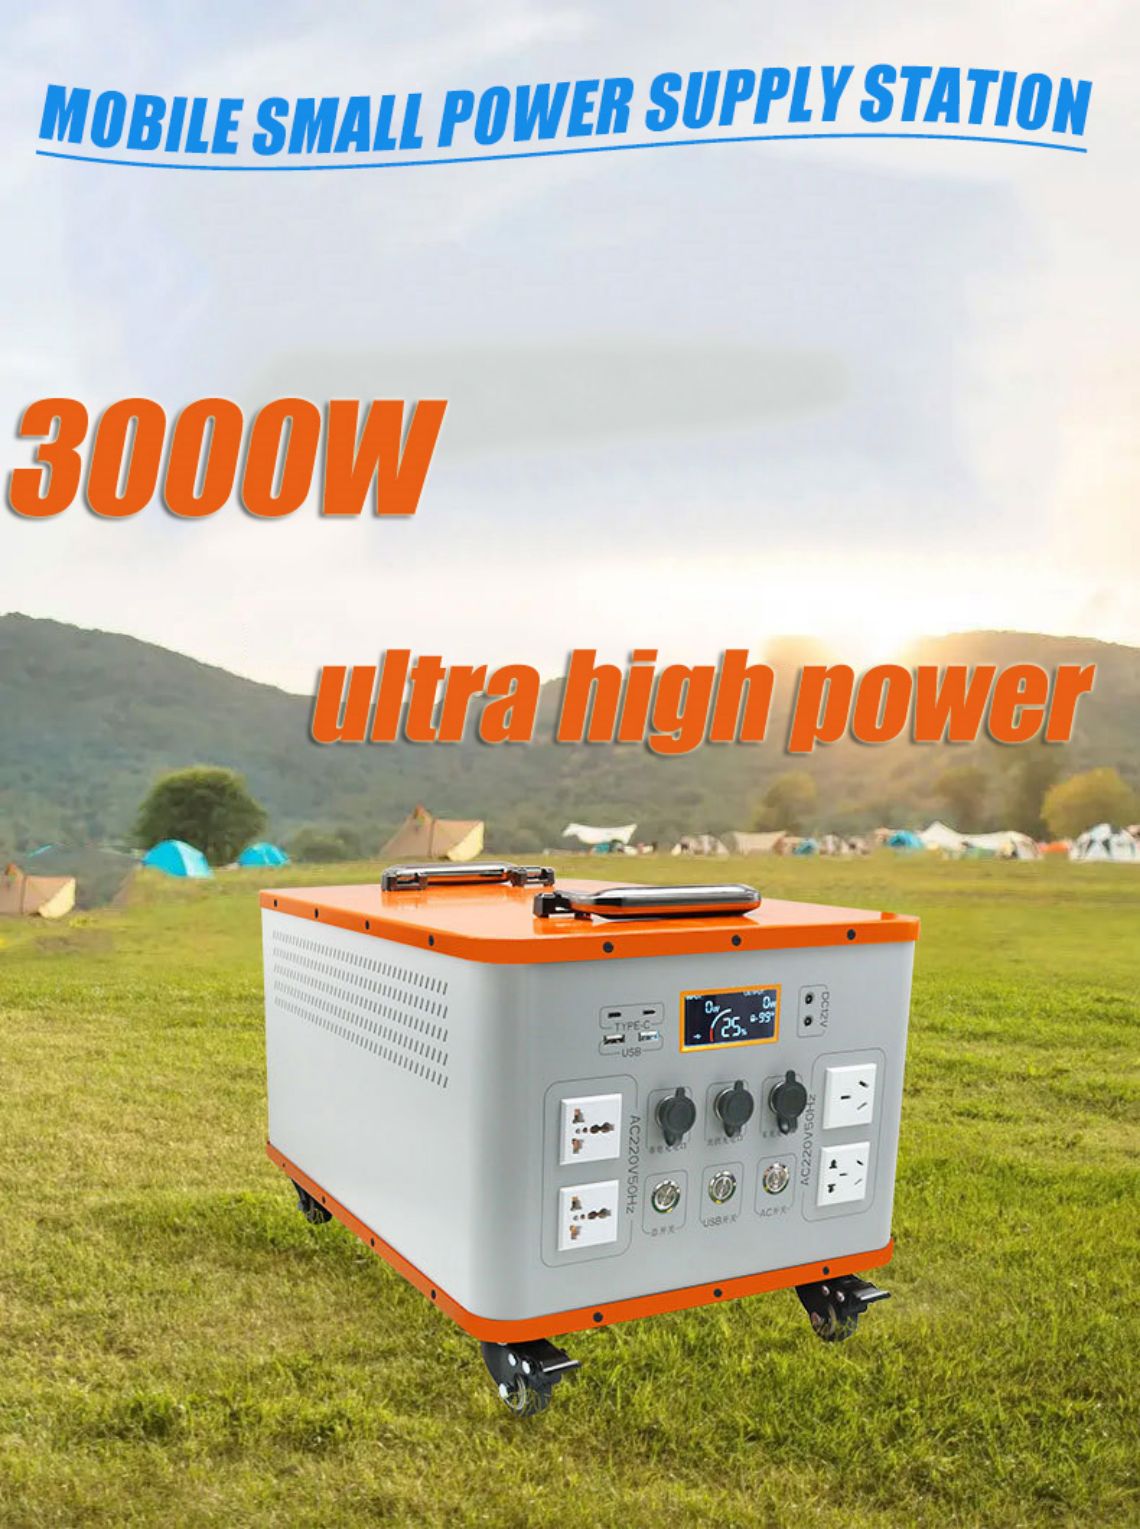 Portable outdoor emergency power station